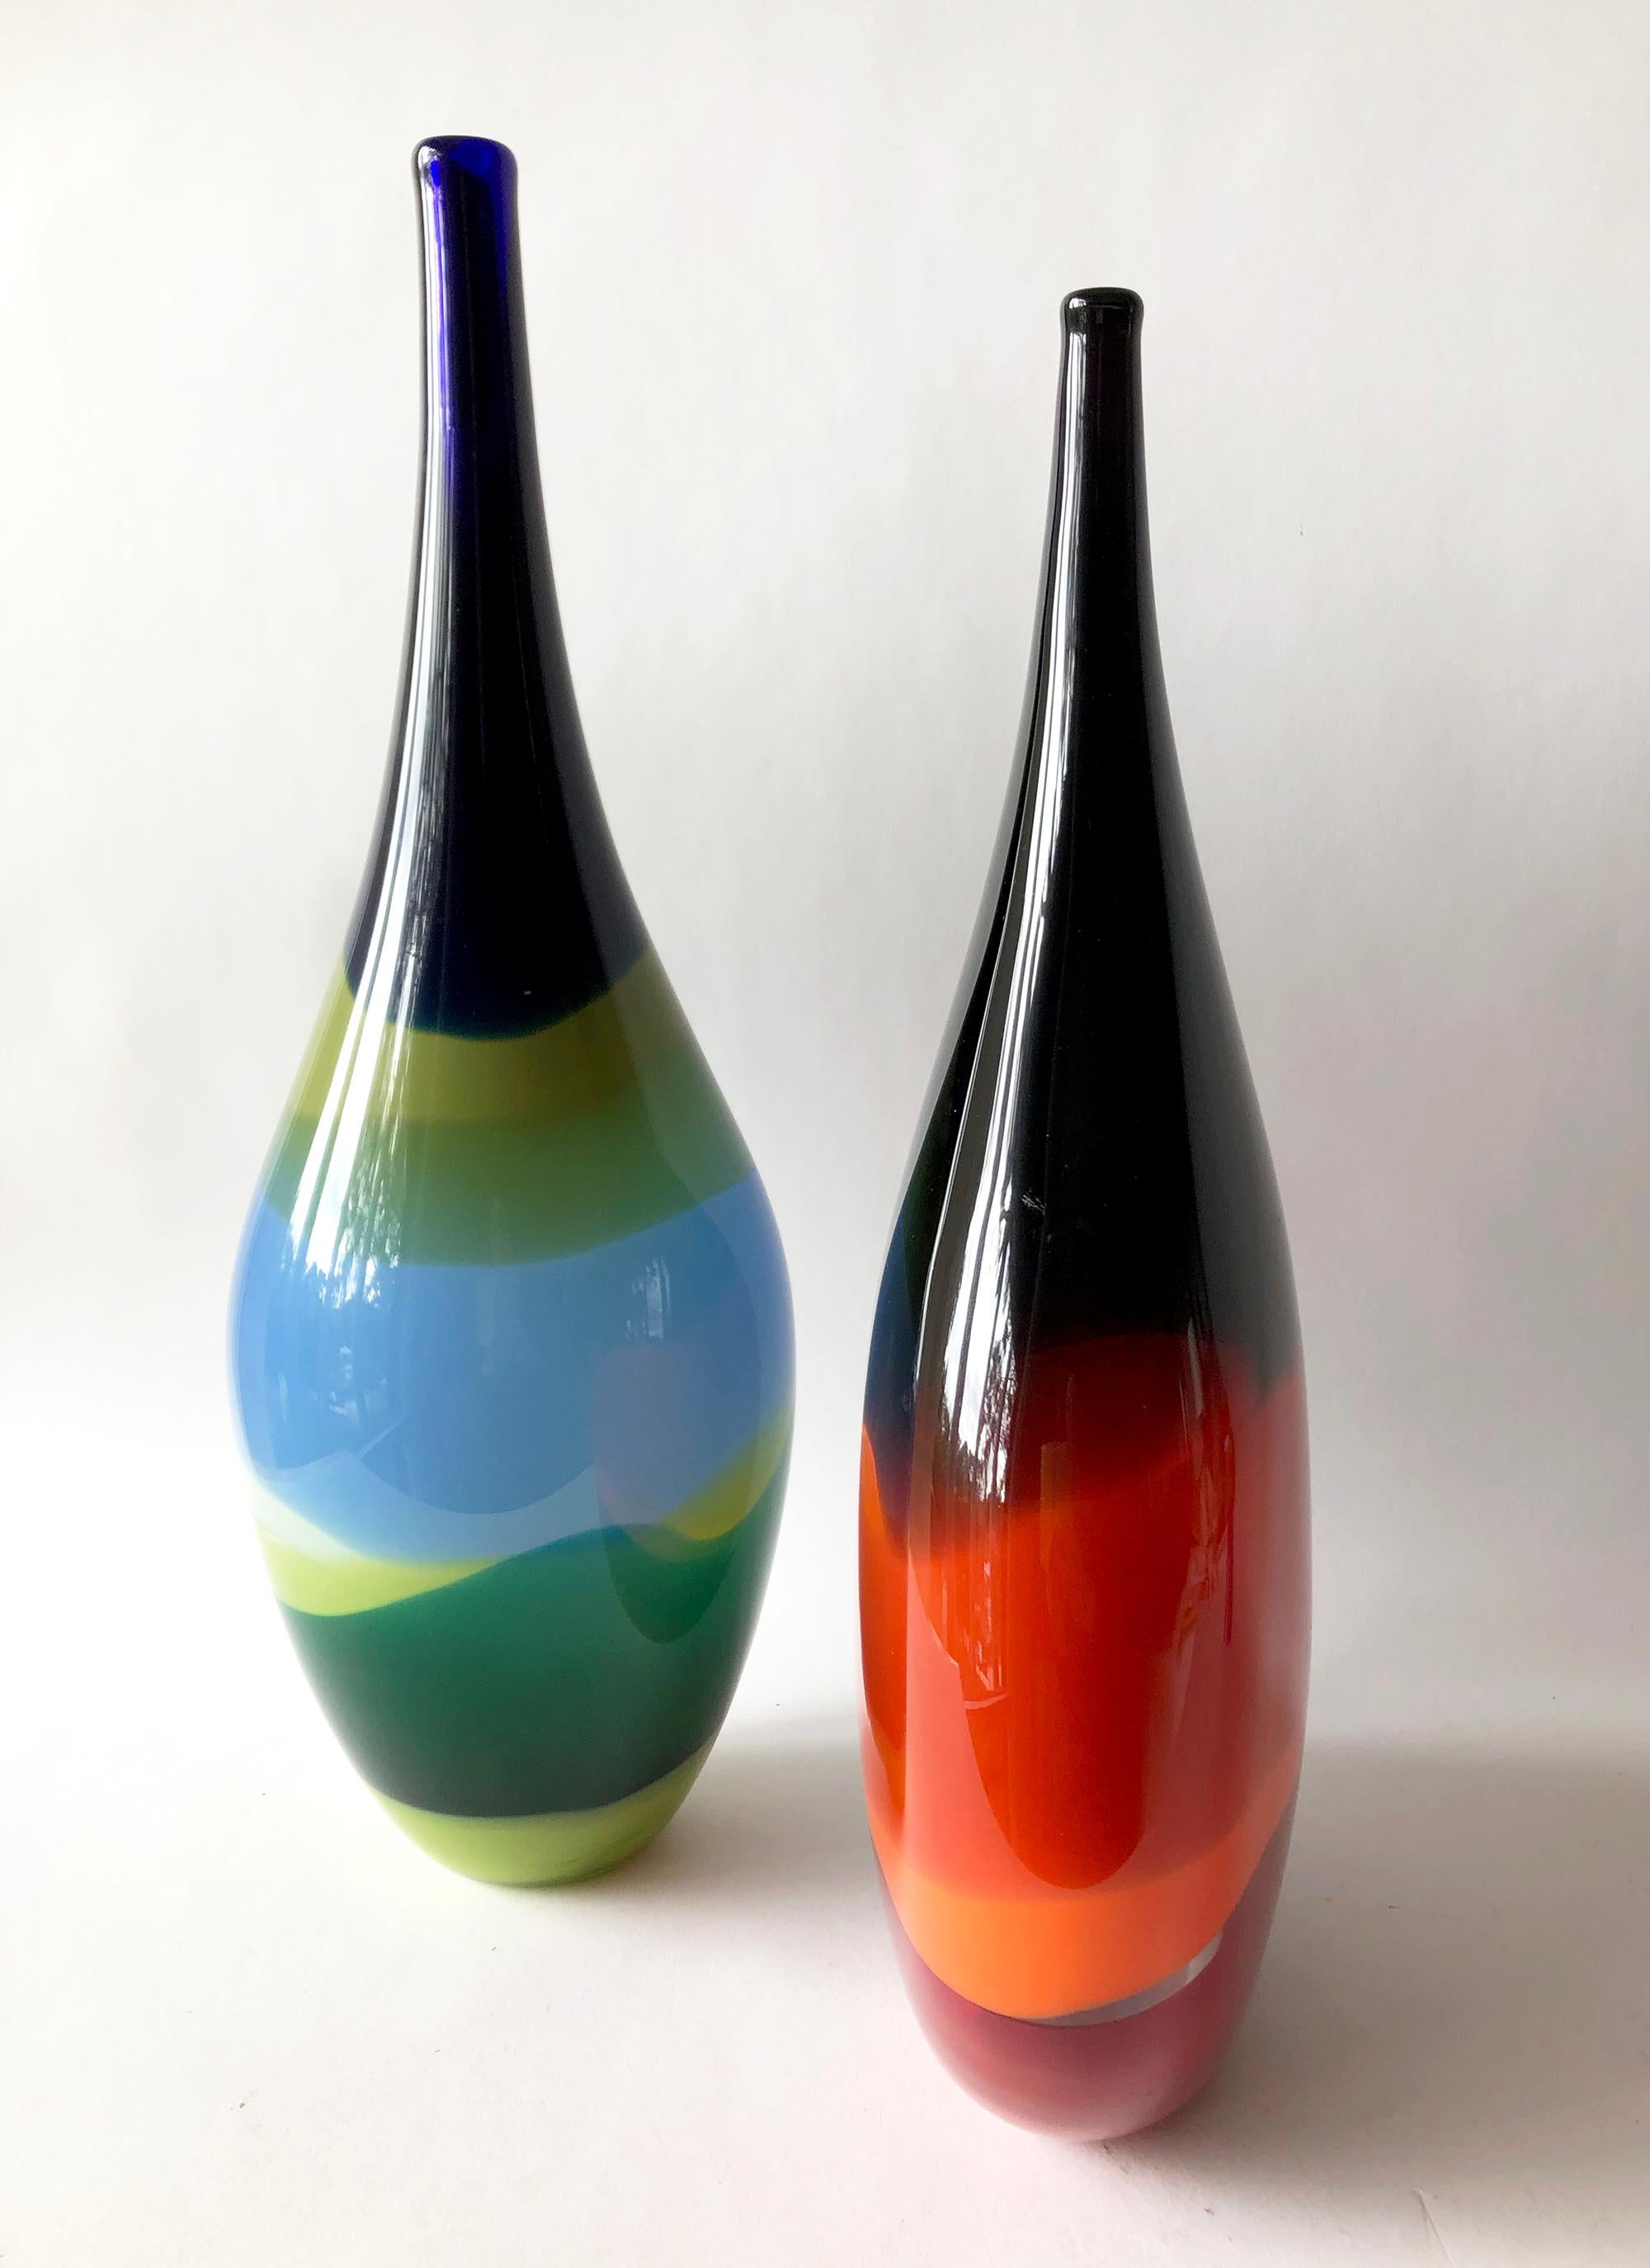 Pair of glass vases made by Caleb Siemon of Siemon & Salazar, California. Tall bottle form measures 18.5